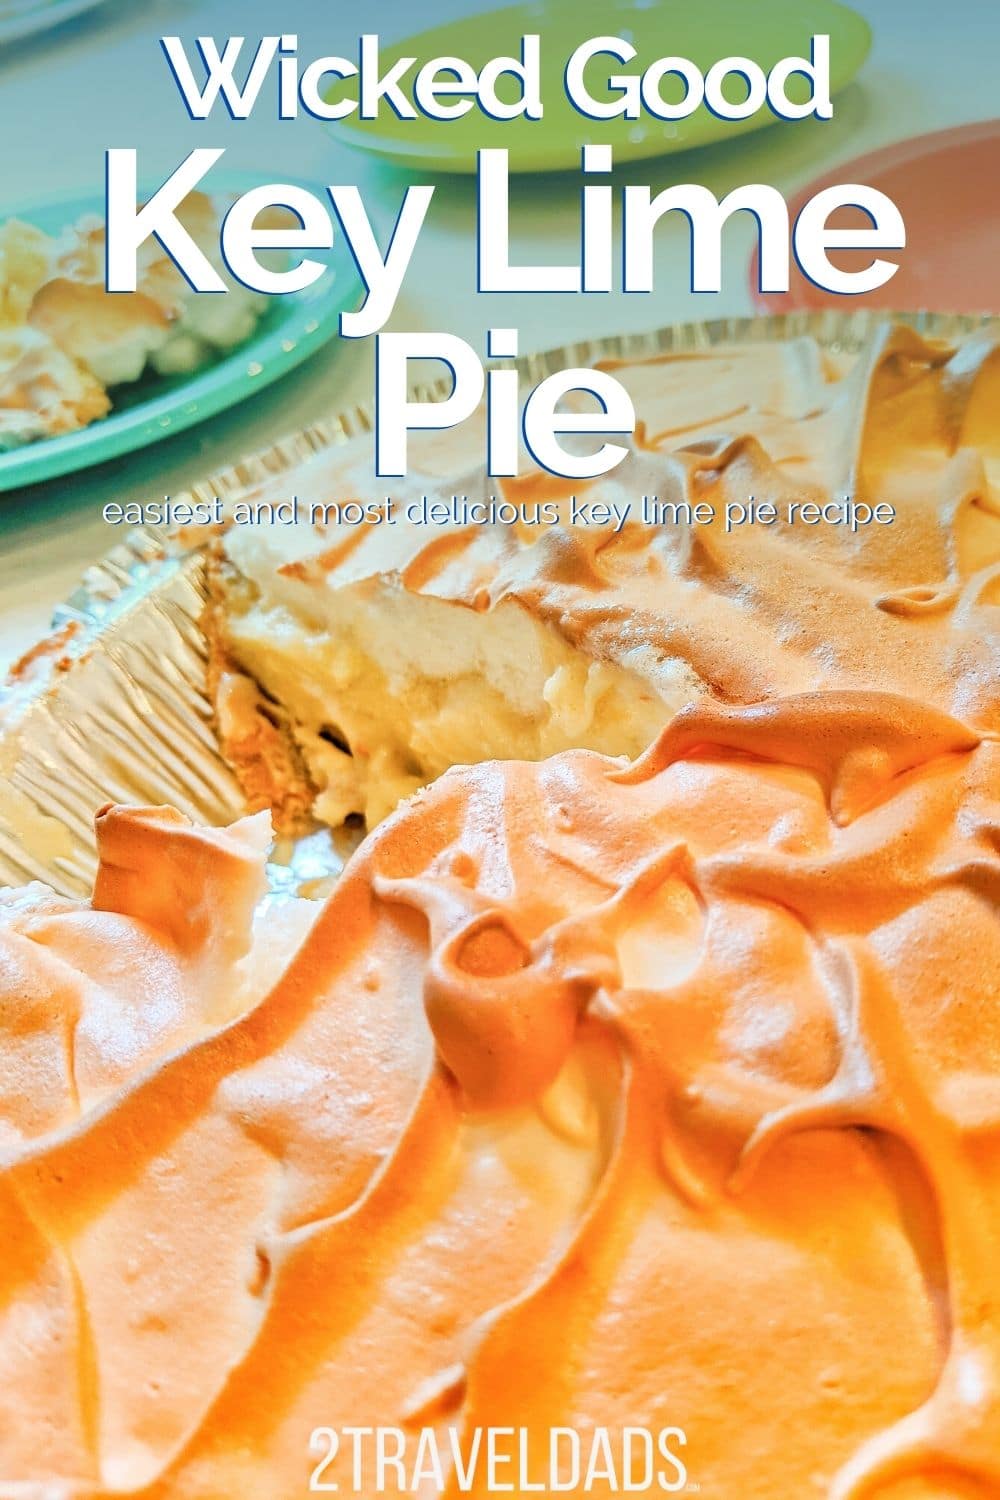 This is the easiest key lime pie recipe around, with easy, delicious options to make it even better than a basic one. After trying many key lime pies and making several, this recipe is the best for a new baker or somebody who's easily distracted.